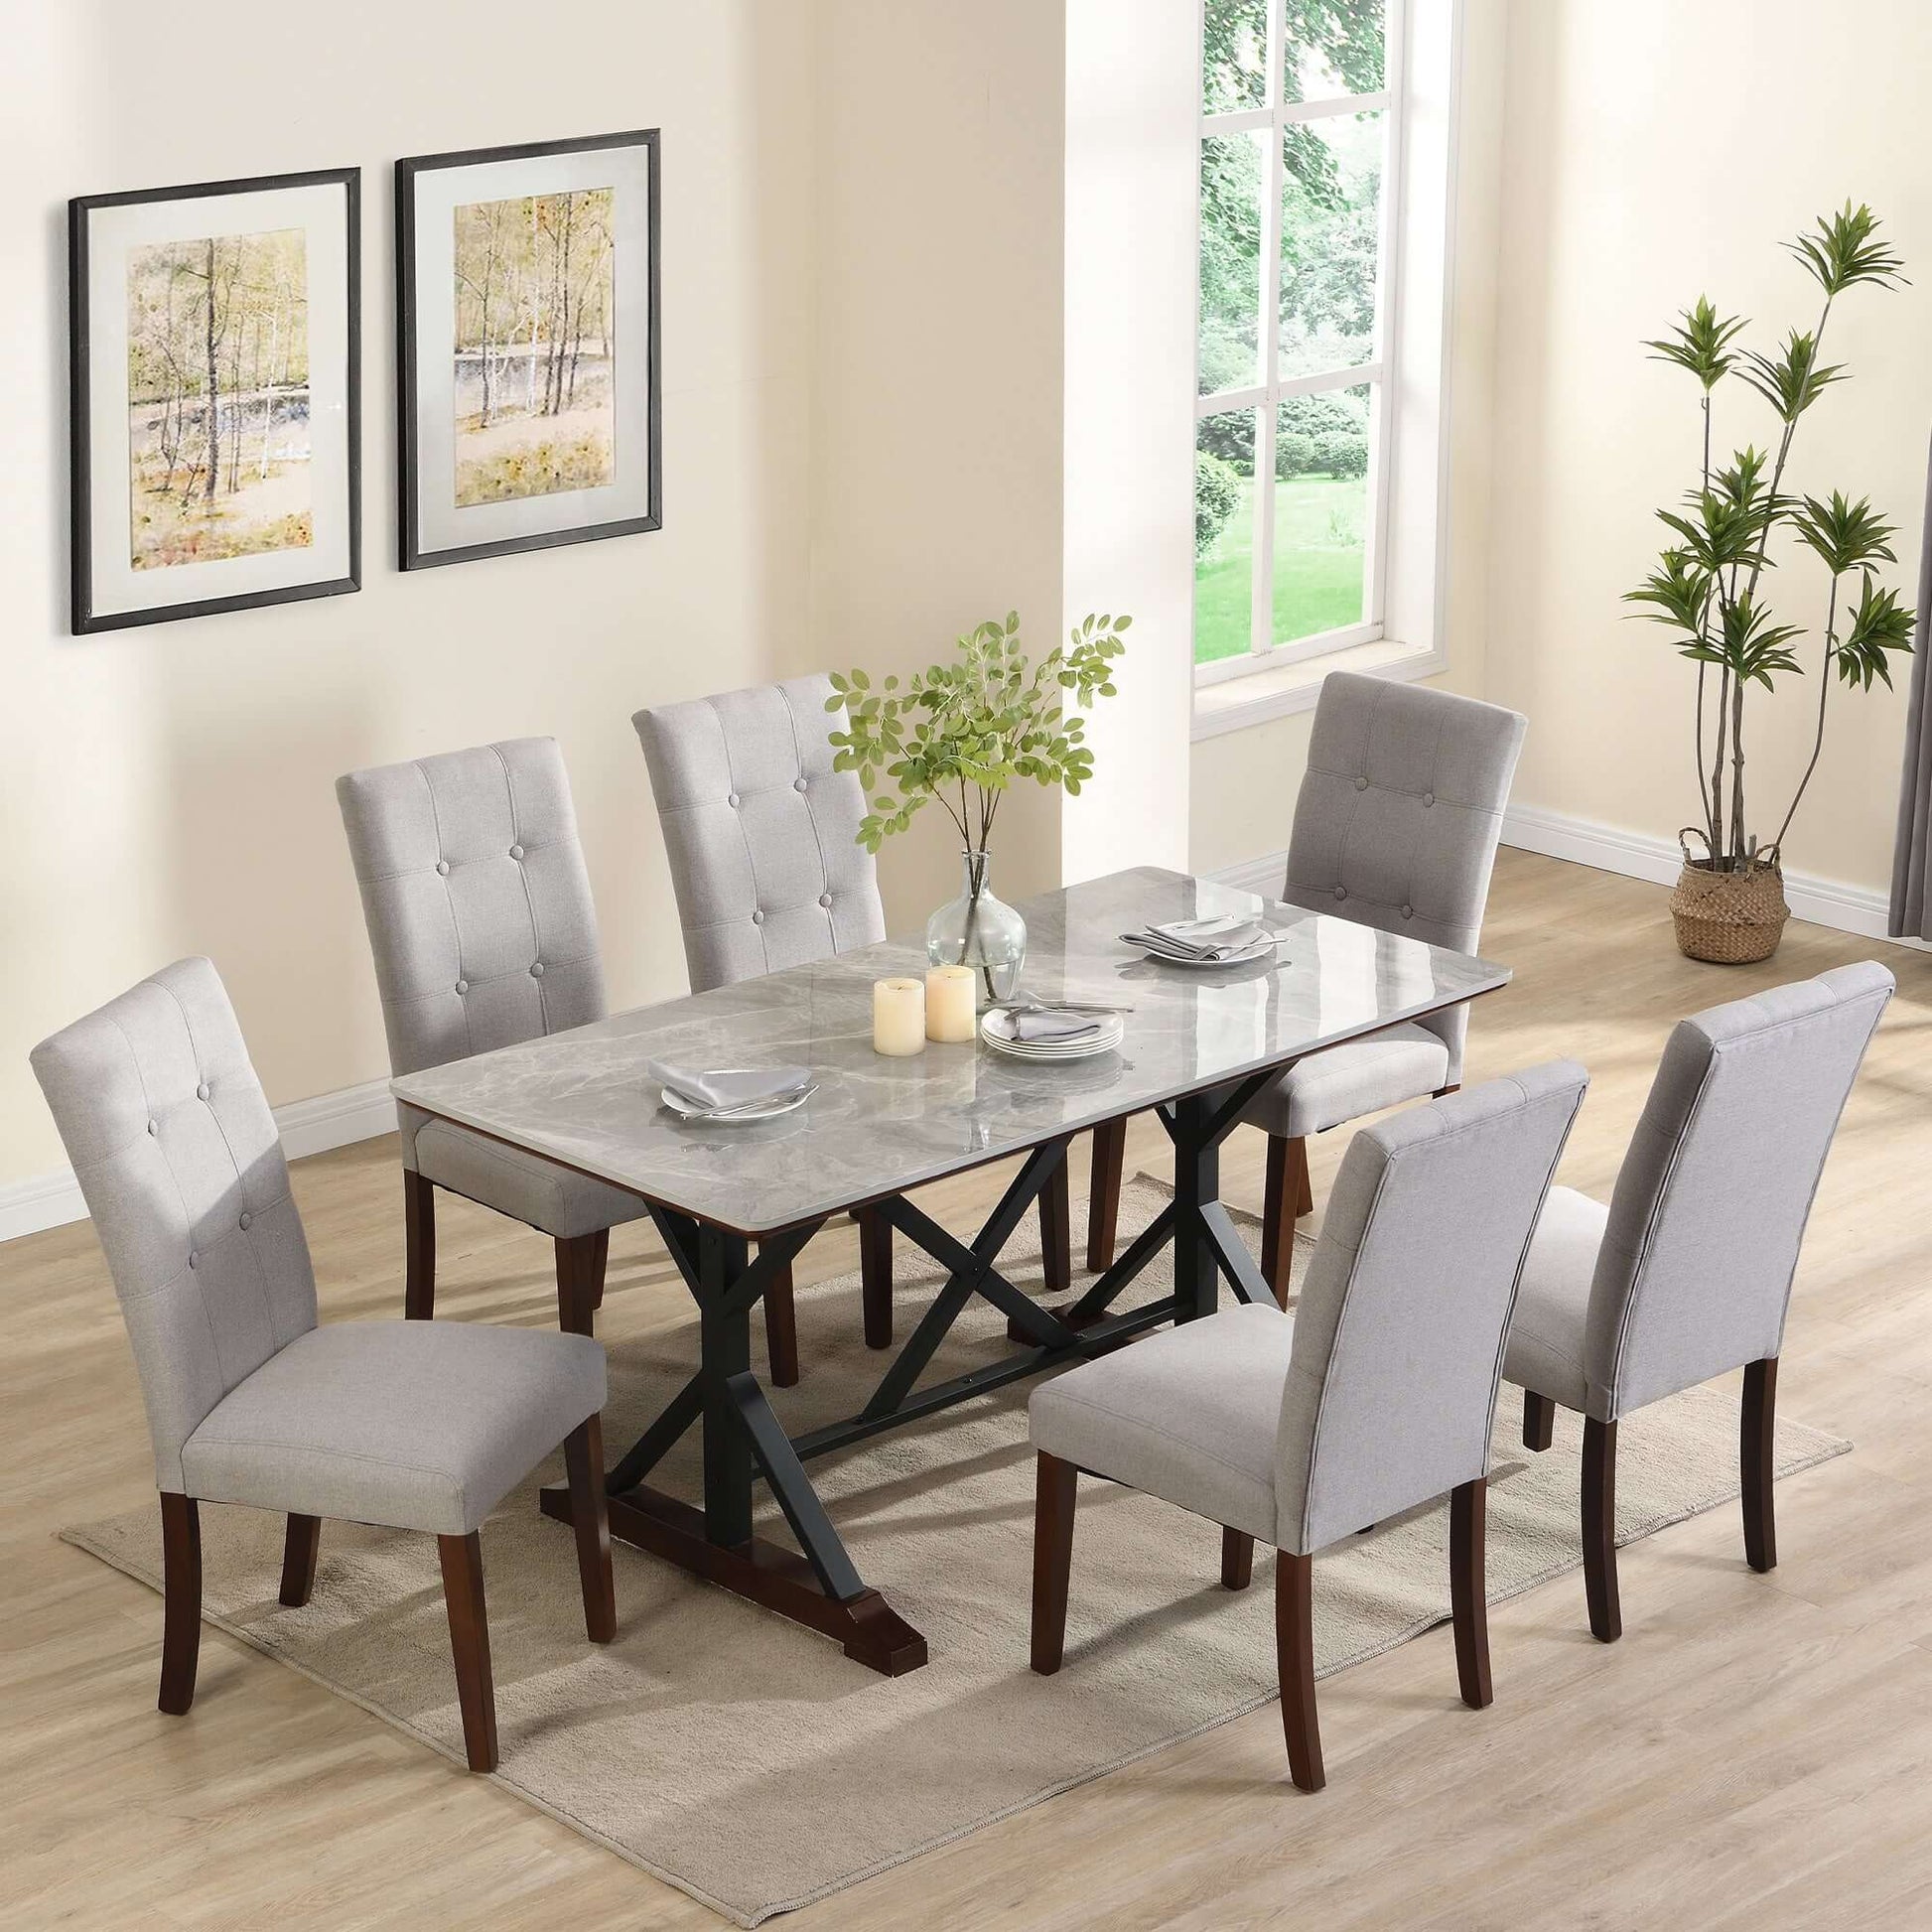 Modern 7-piece dining table set with gray sintered stone table and six tufted upholstered chairs in dining room.